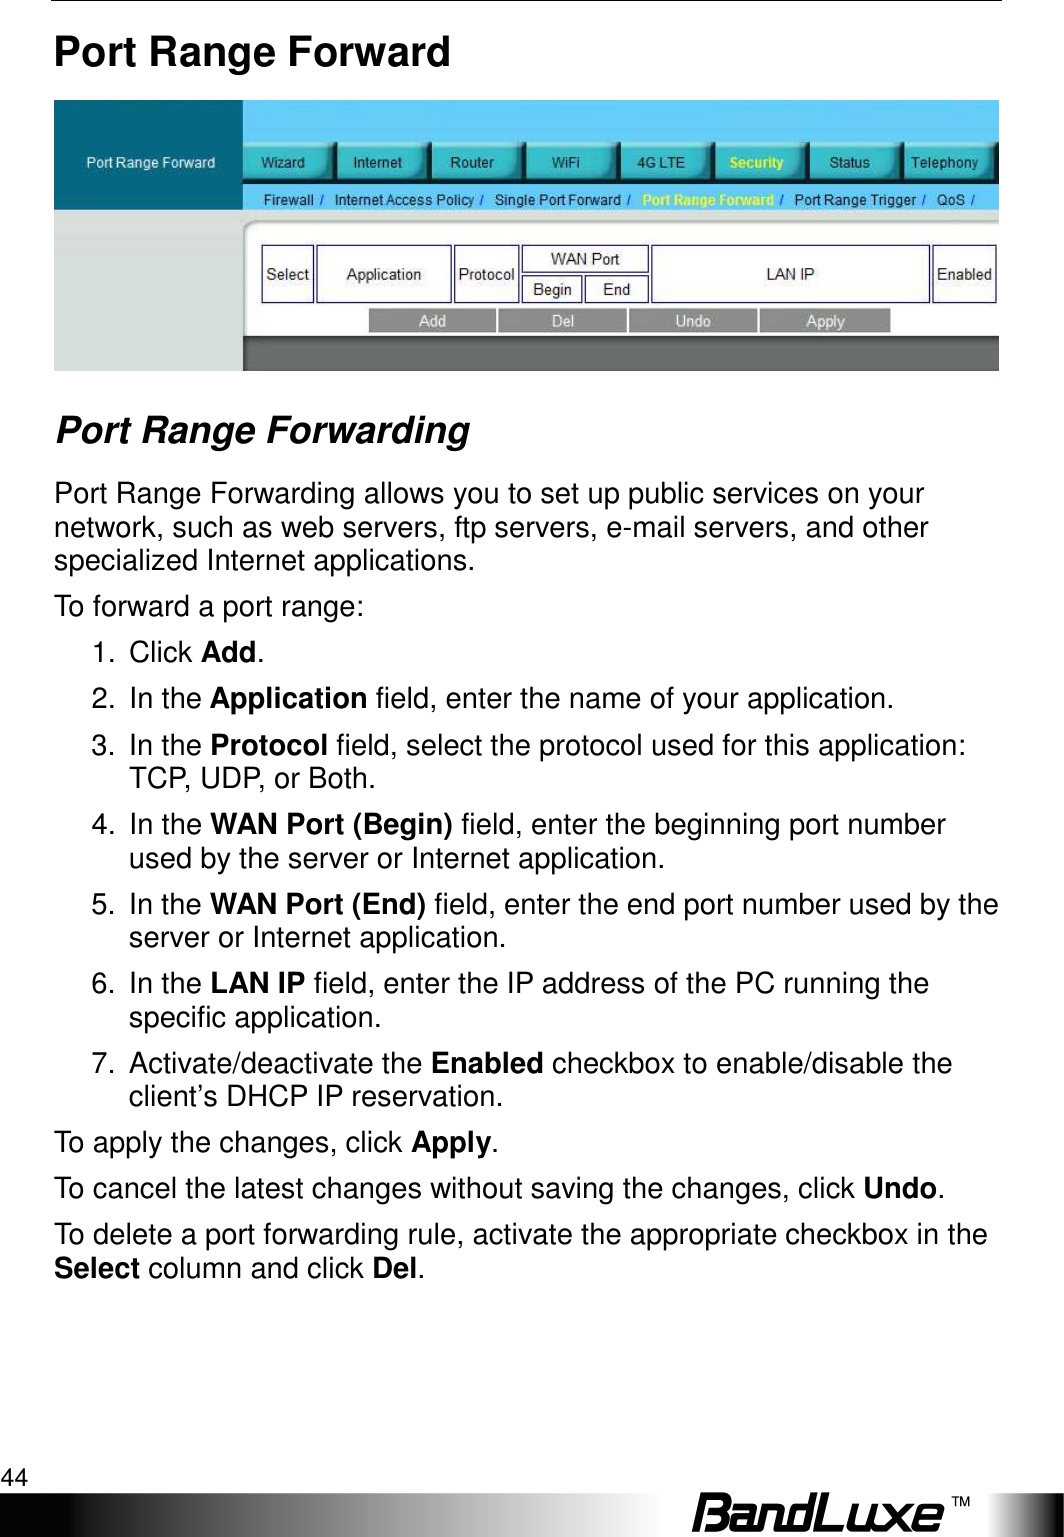 Security Setup 44  Port Range Forward  Port Range Forwarding   Port Range Forwarding allows you to set up public services on your network, such as web servers, ftp servers, e-mail servers, and other specialized Internet applications.   To forward a port range: 1.  Click Add. 2.  In the Application field, enter the name of your application. 3.  In the Protocol field, select the protocol used for this application: TCP, UDP, or Both. 4.  In the WAN Port (Begin) field, enter the beginning port number used by the server or Internet application. 5.  In the WAN Port (End) field, enter the end port number used by the server or Internet application. 6.  In the LAN IP field, enter the IP address of the PC running the specific application. 7.  Activate/deactivate the Enabled checkbox to enable/disable the client’s DHCP IP reservation.   To apply the changes, click Apply.   To cancel the latest changes without saving the changes, click Undo. To delete a port forwarding rule, activate the appropriate checkbox in the Select column and click Del.  